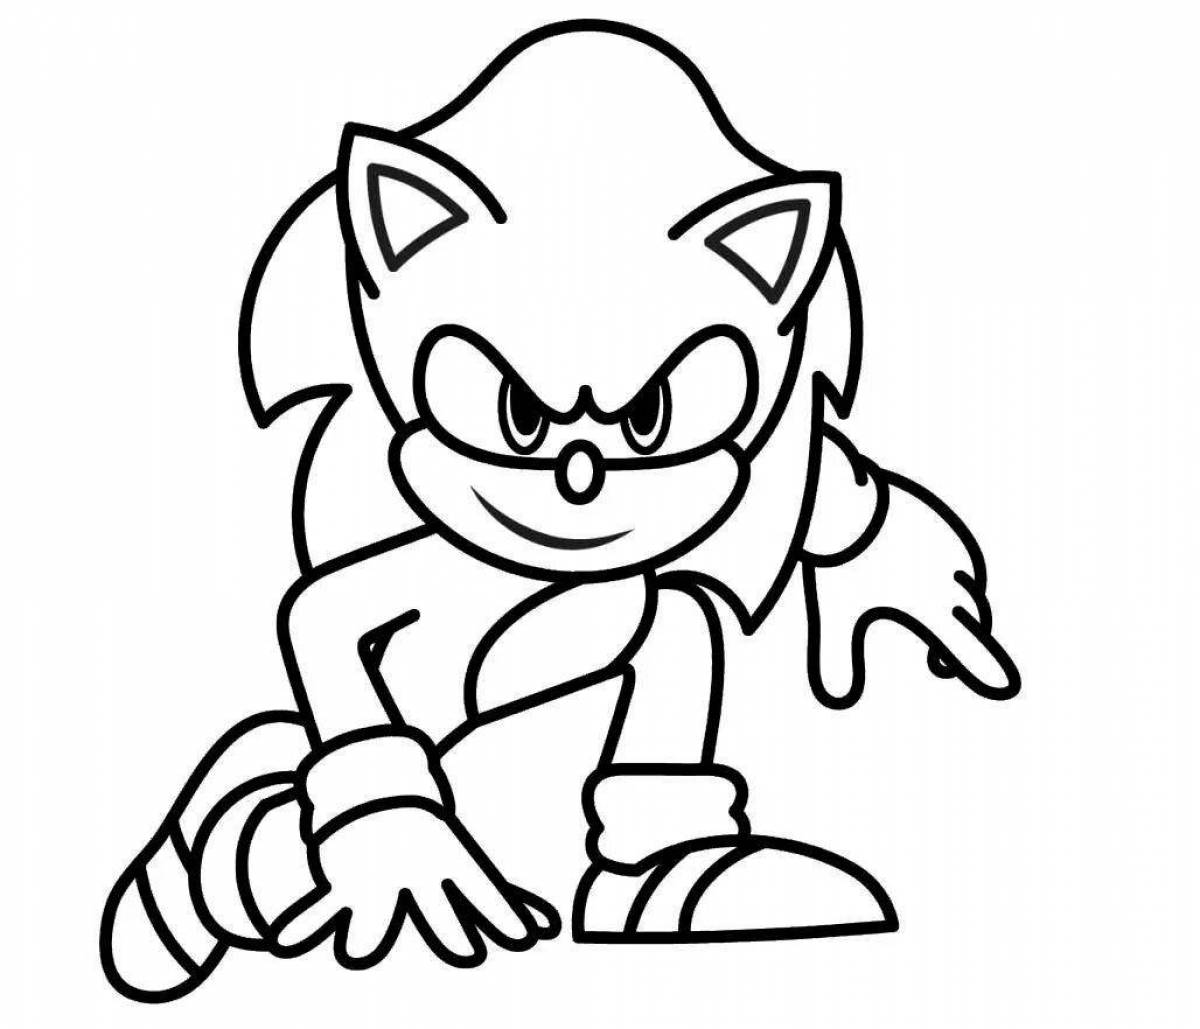 Evil sonic coloring page - ghost